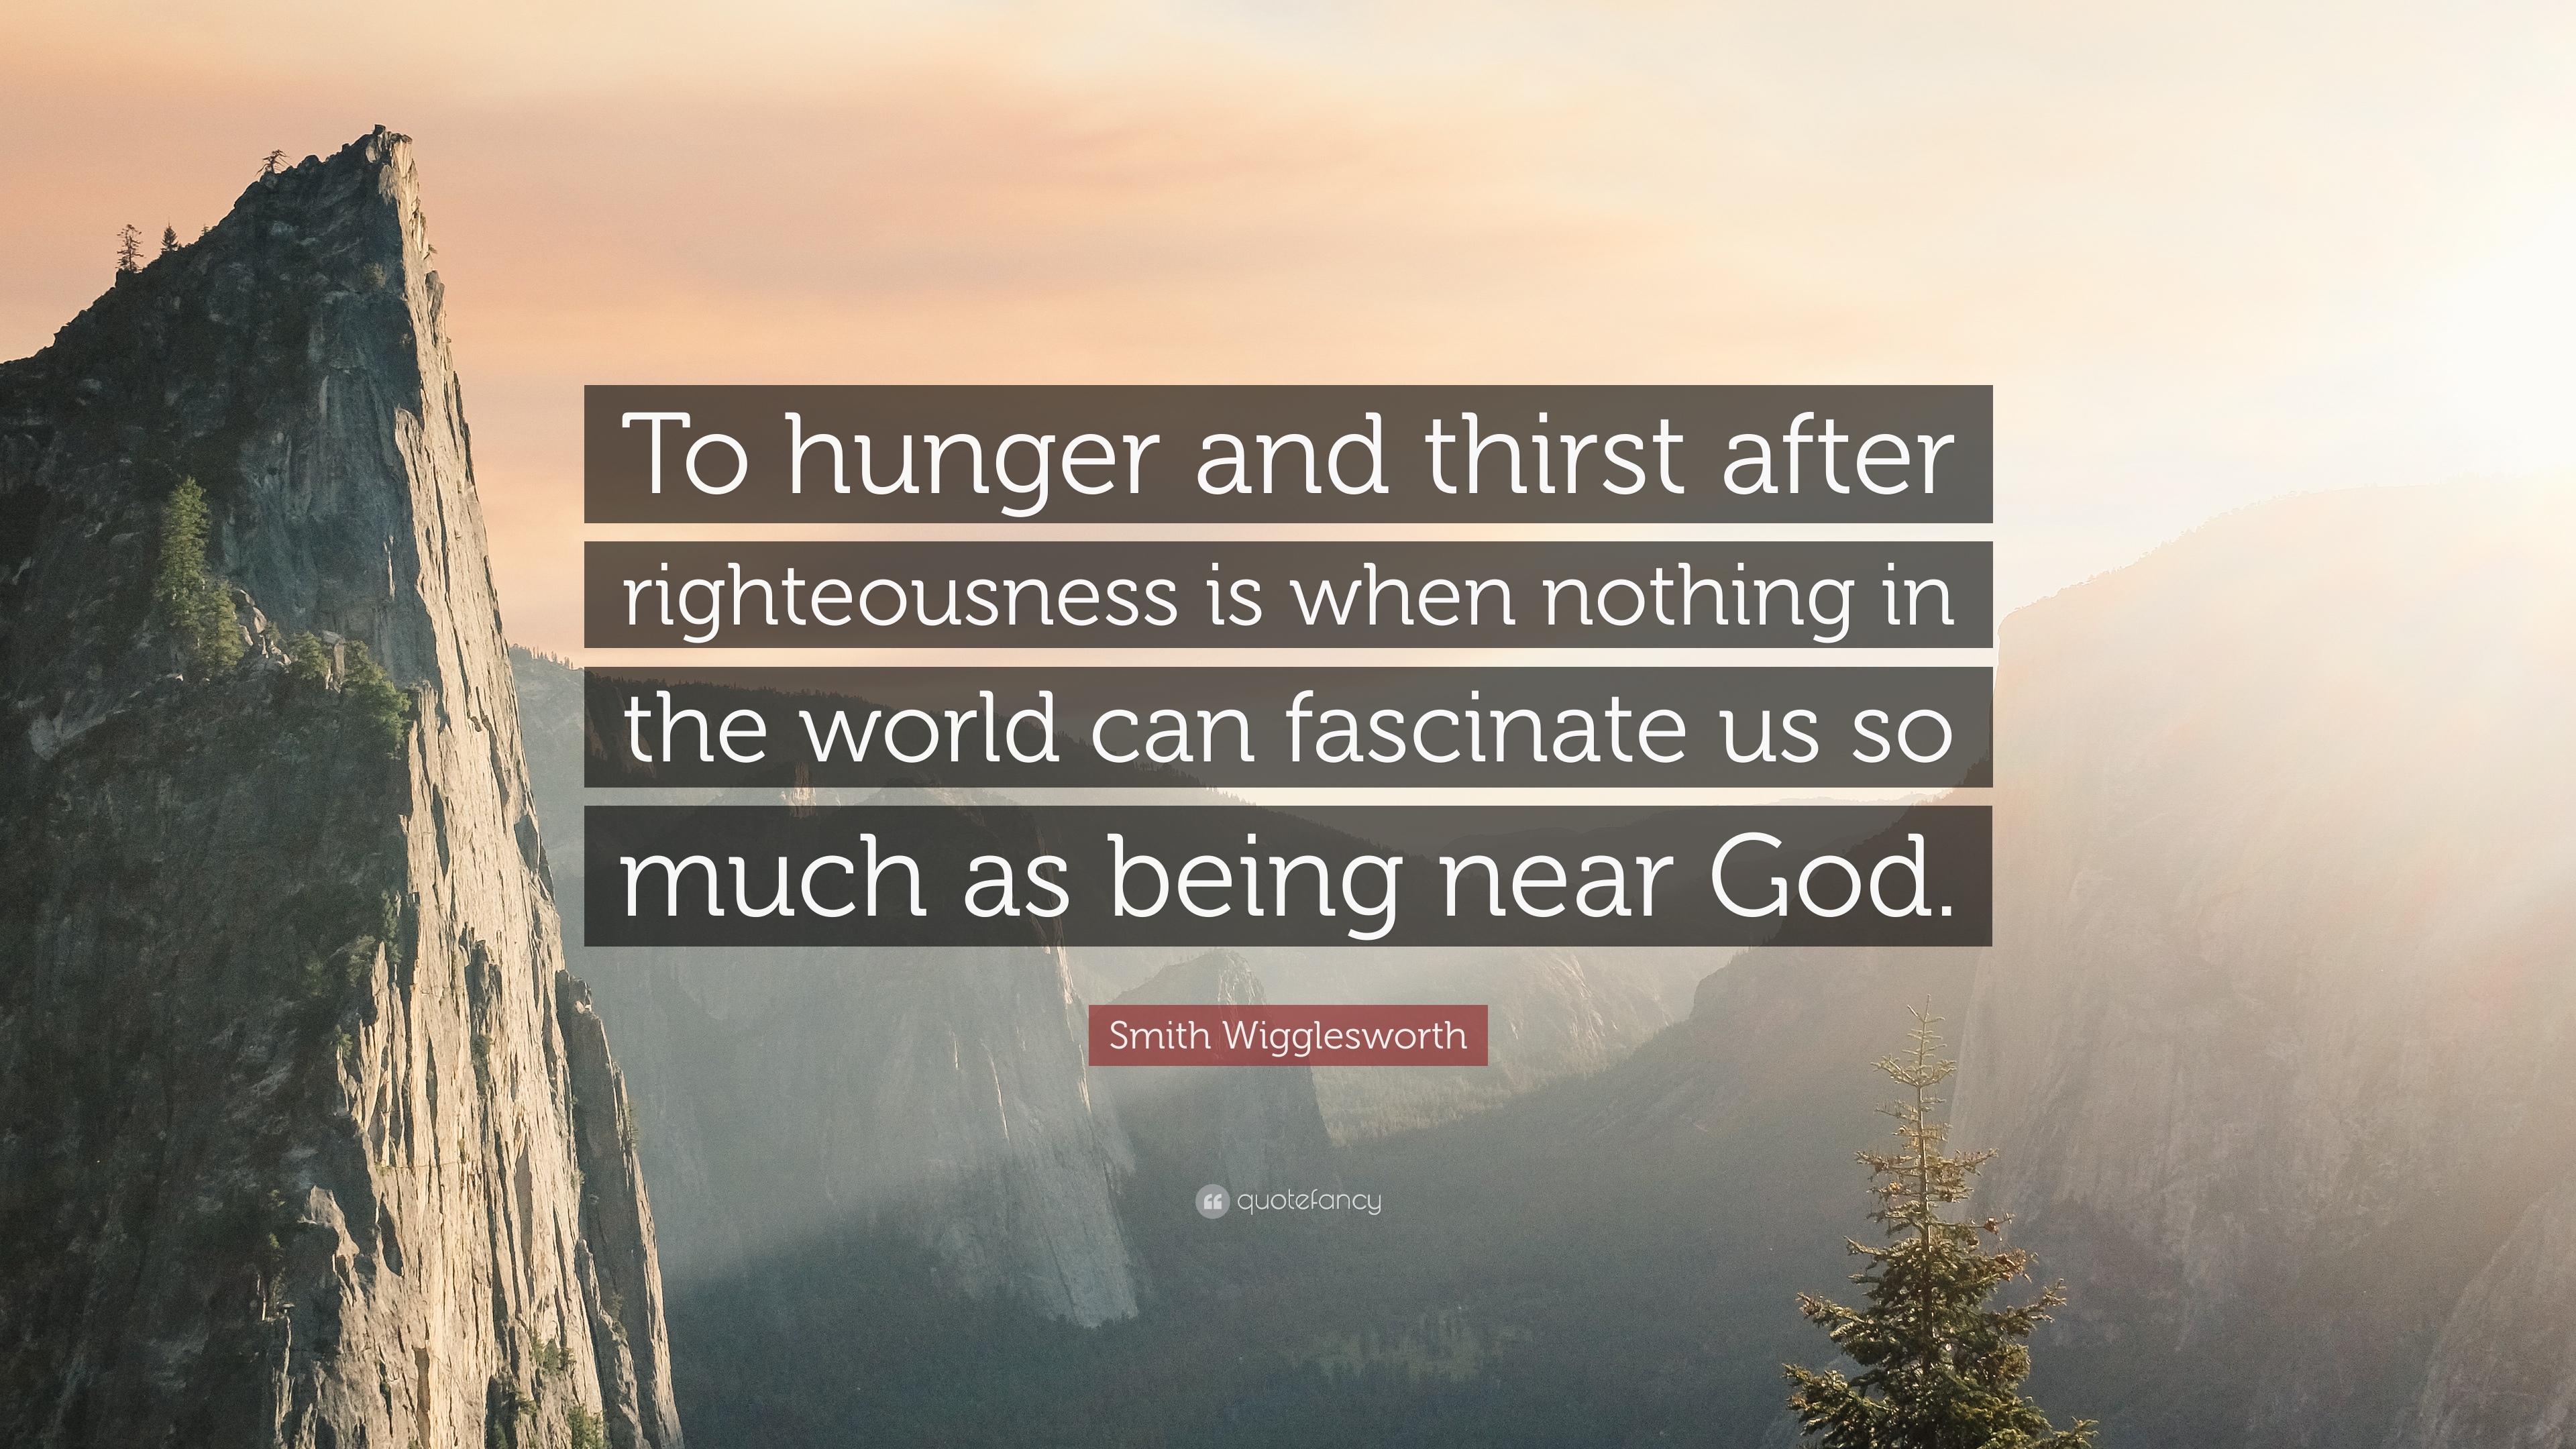 Smith Wigglesworth Quote: “To hunger and thirst after righteousness ...